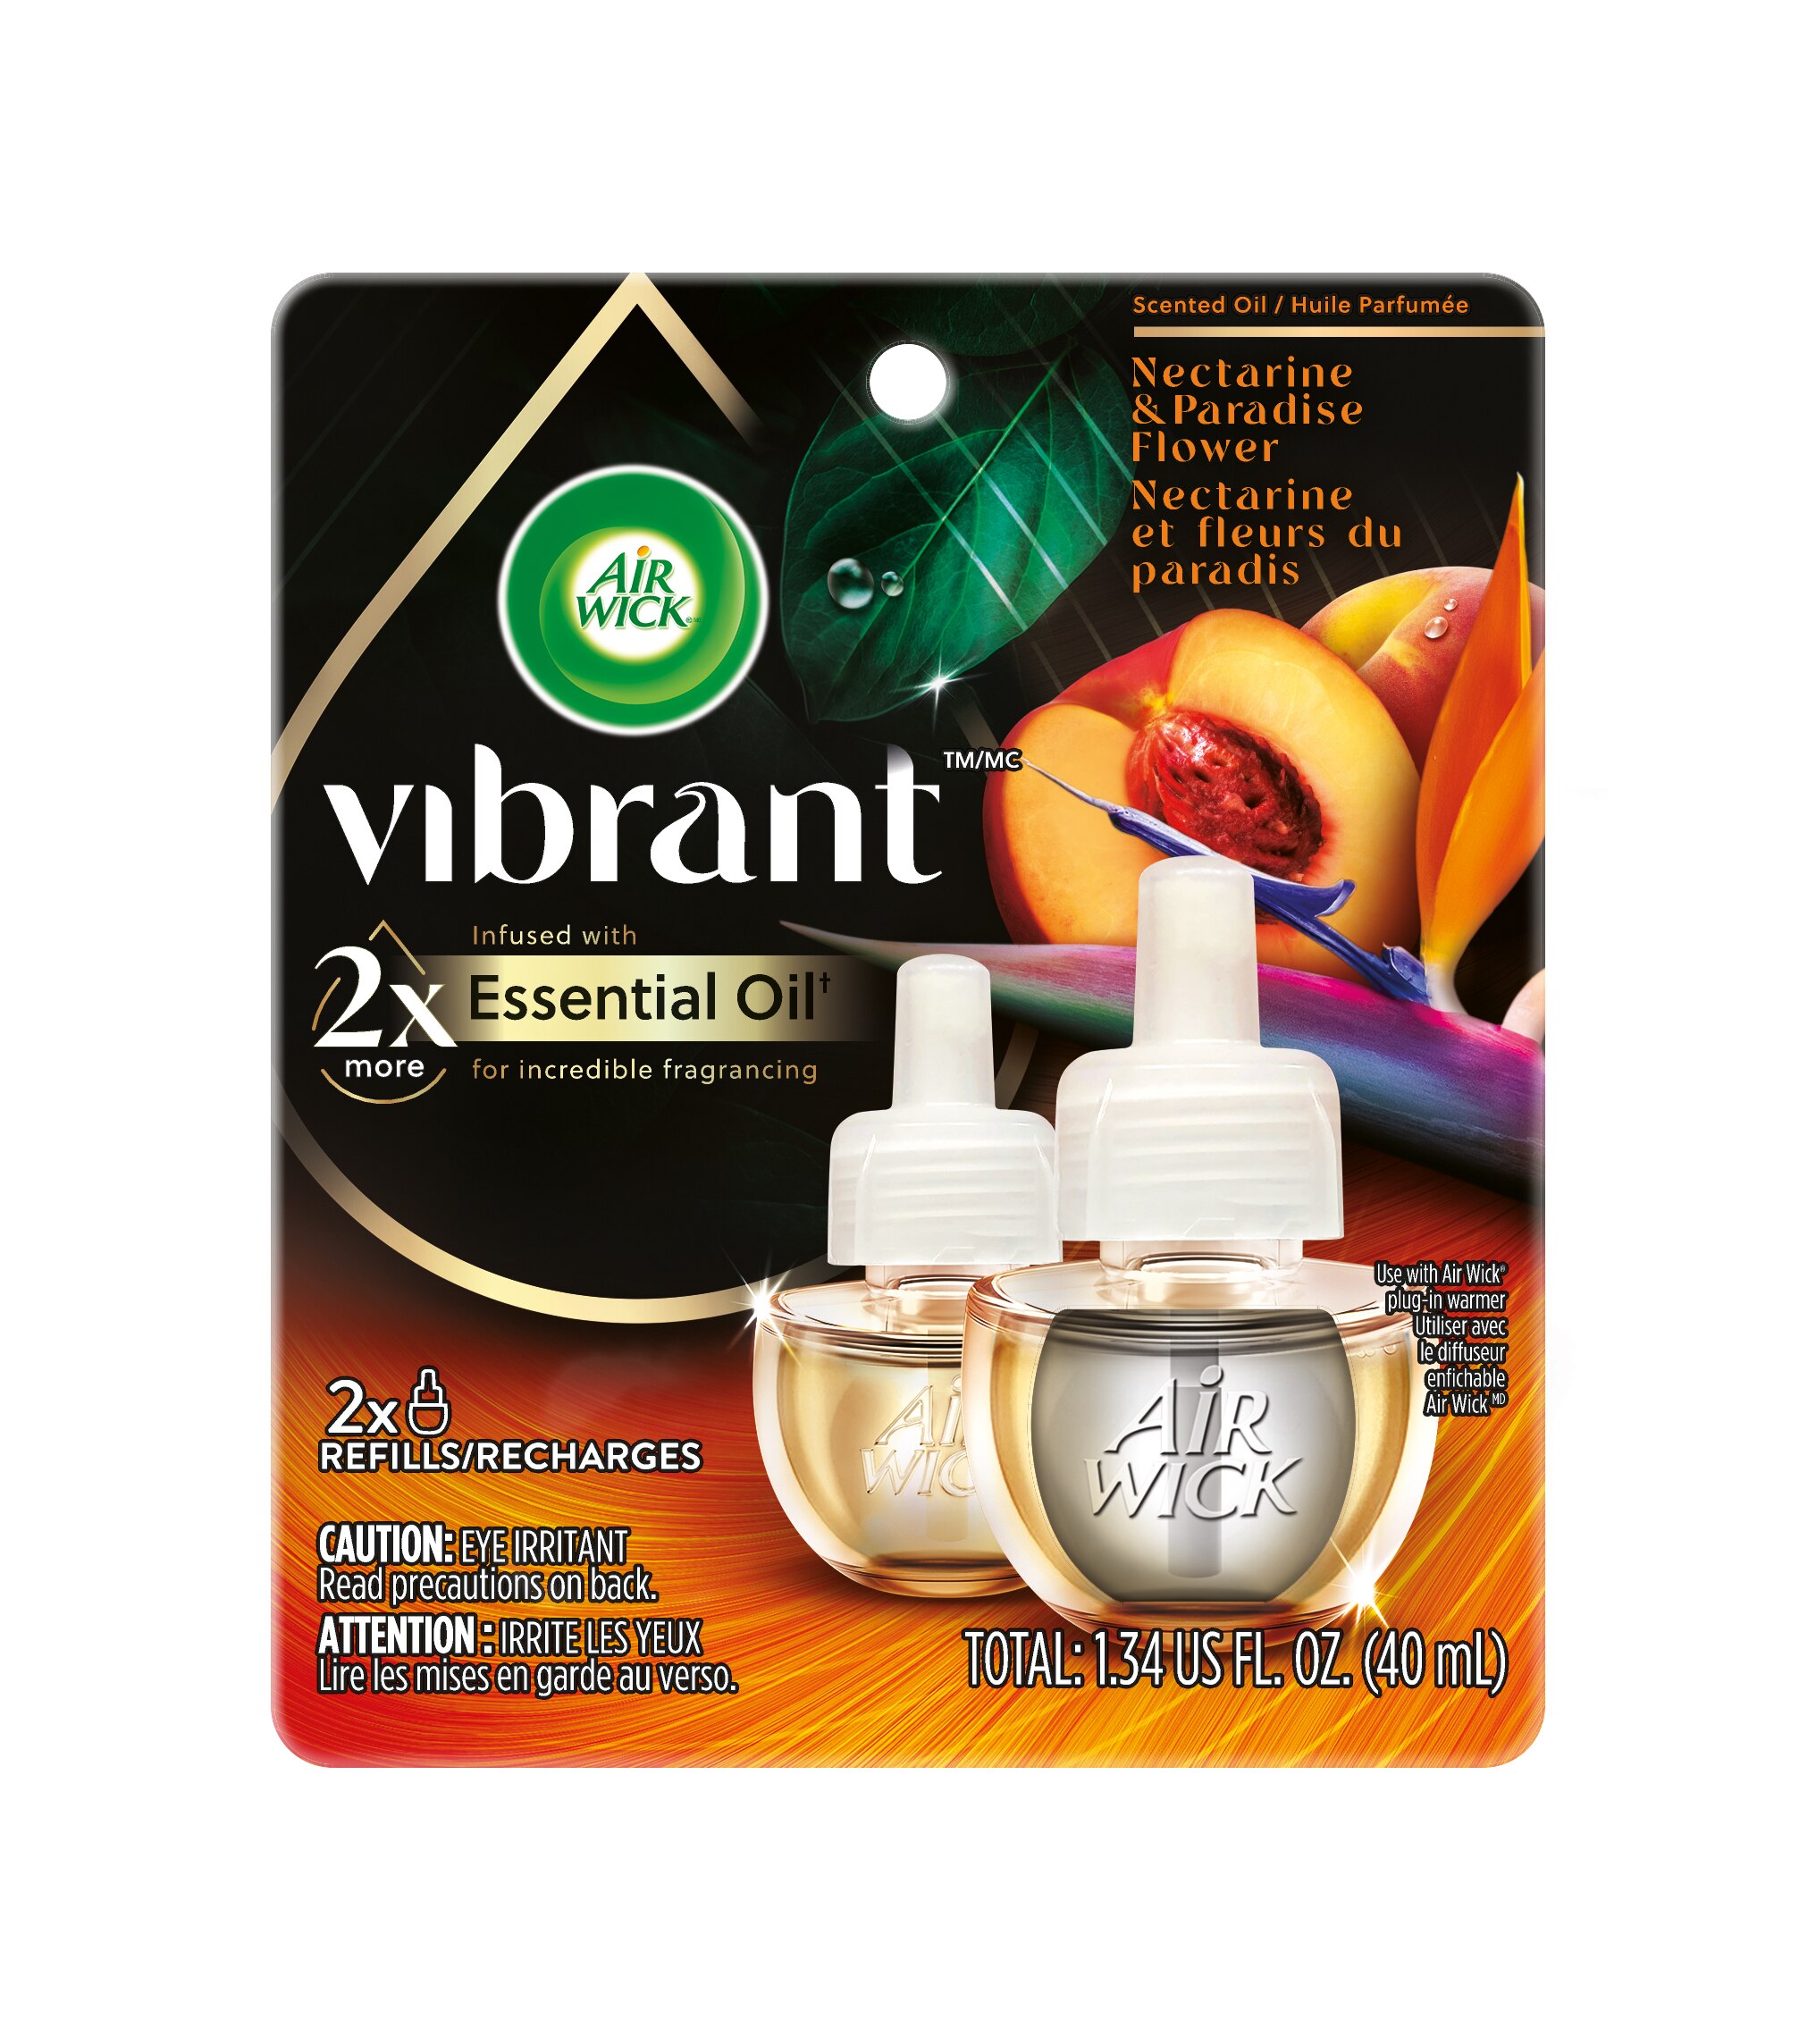 Introducing Air Wick® Vibrant - Infused with 2x more natural essential  oils* for our most amazing fragrance experience.